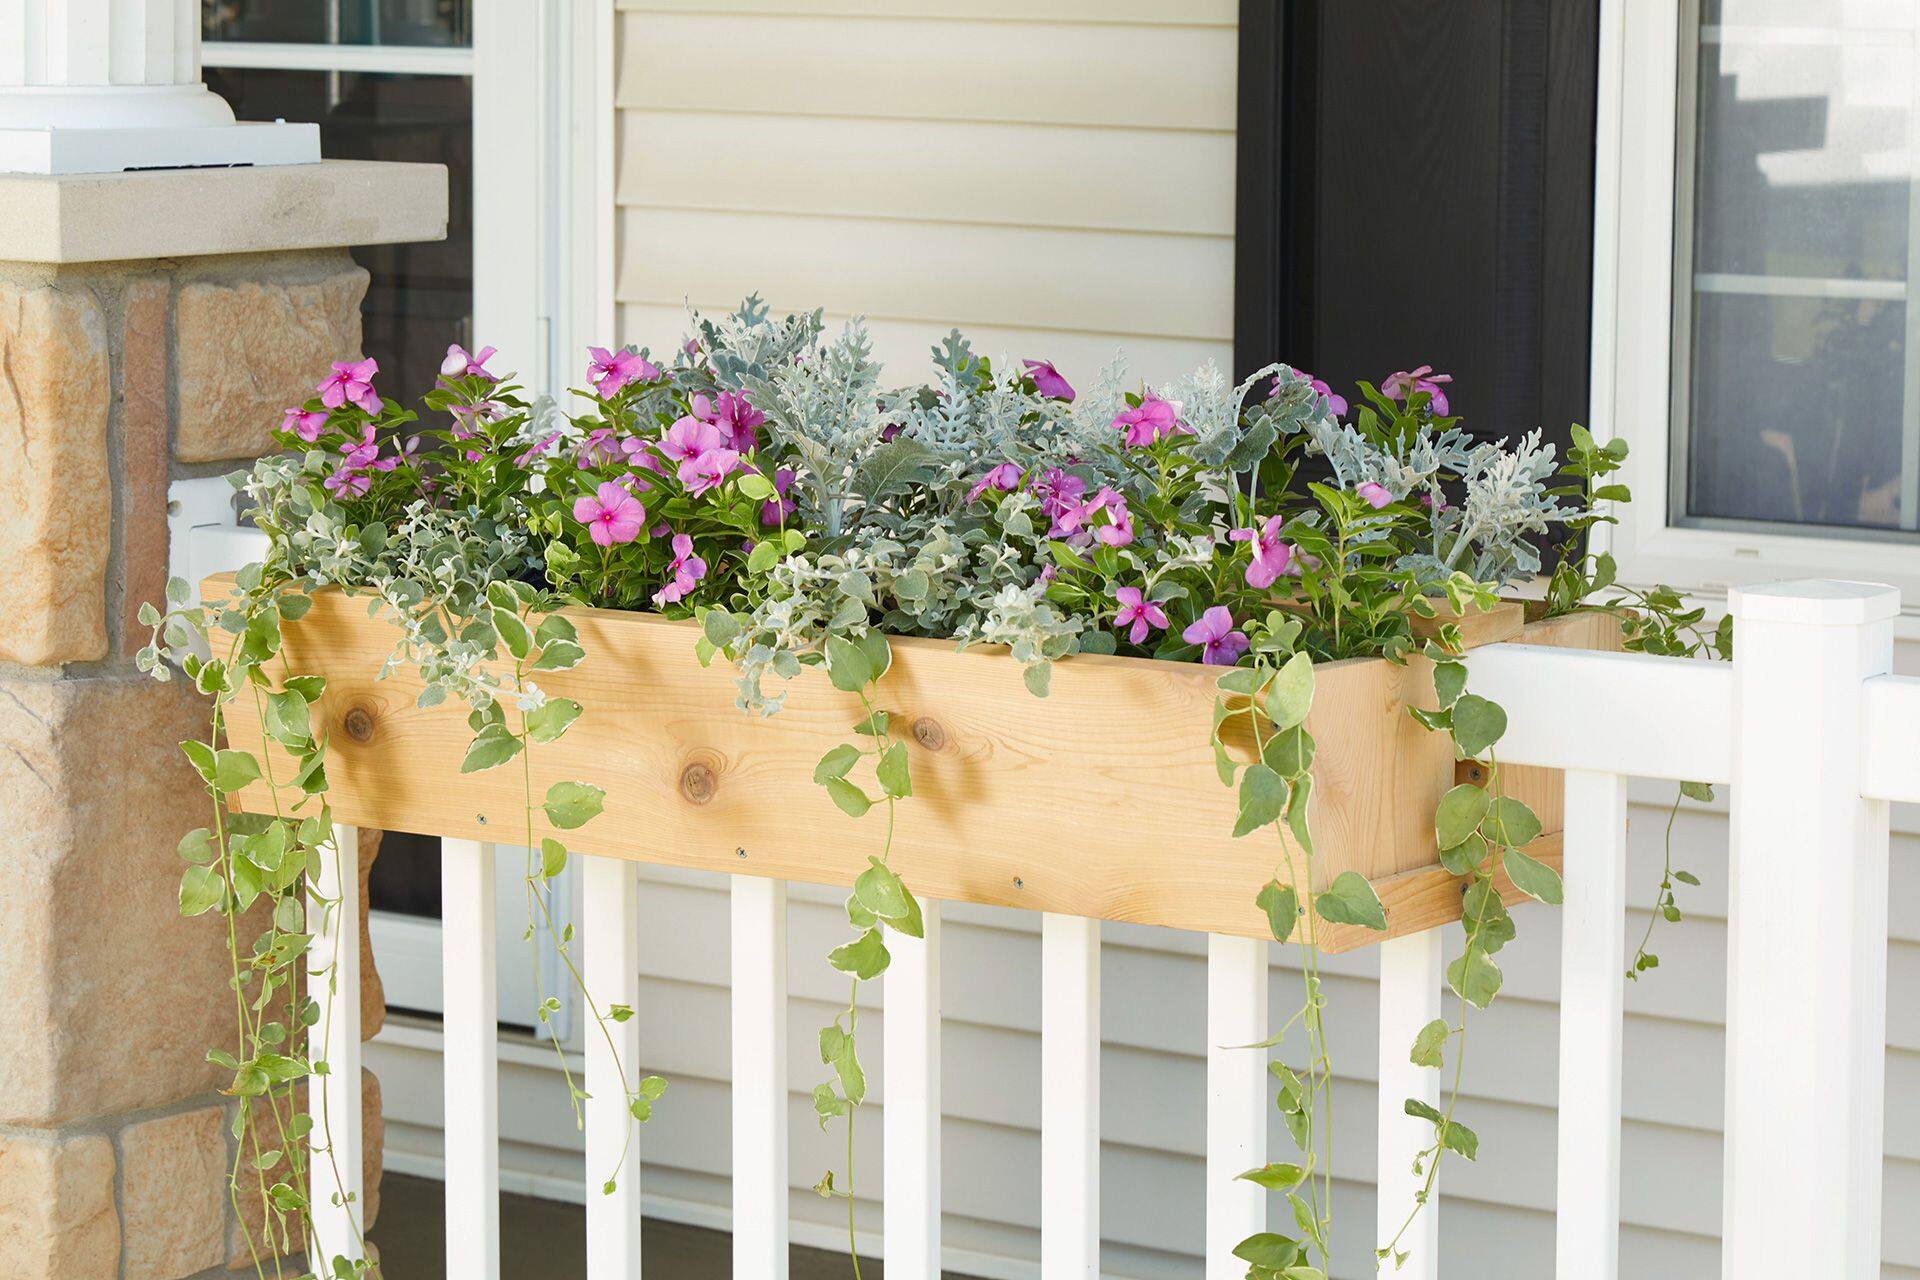 How To Make Flower Boxes For Porch Railings